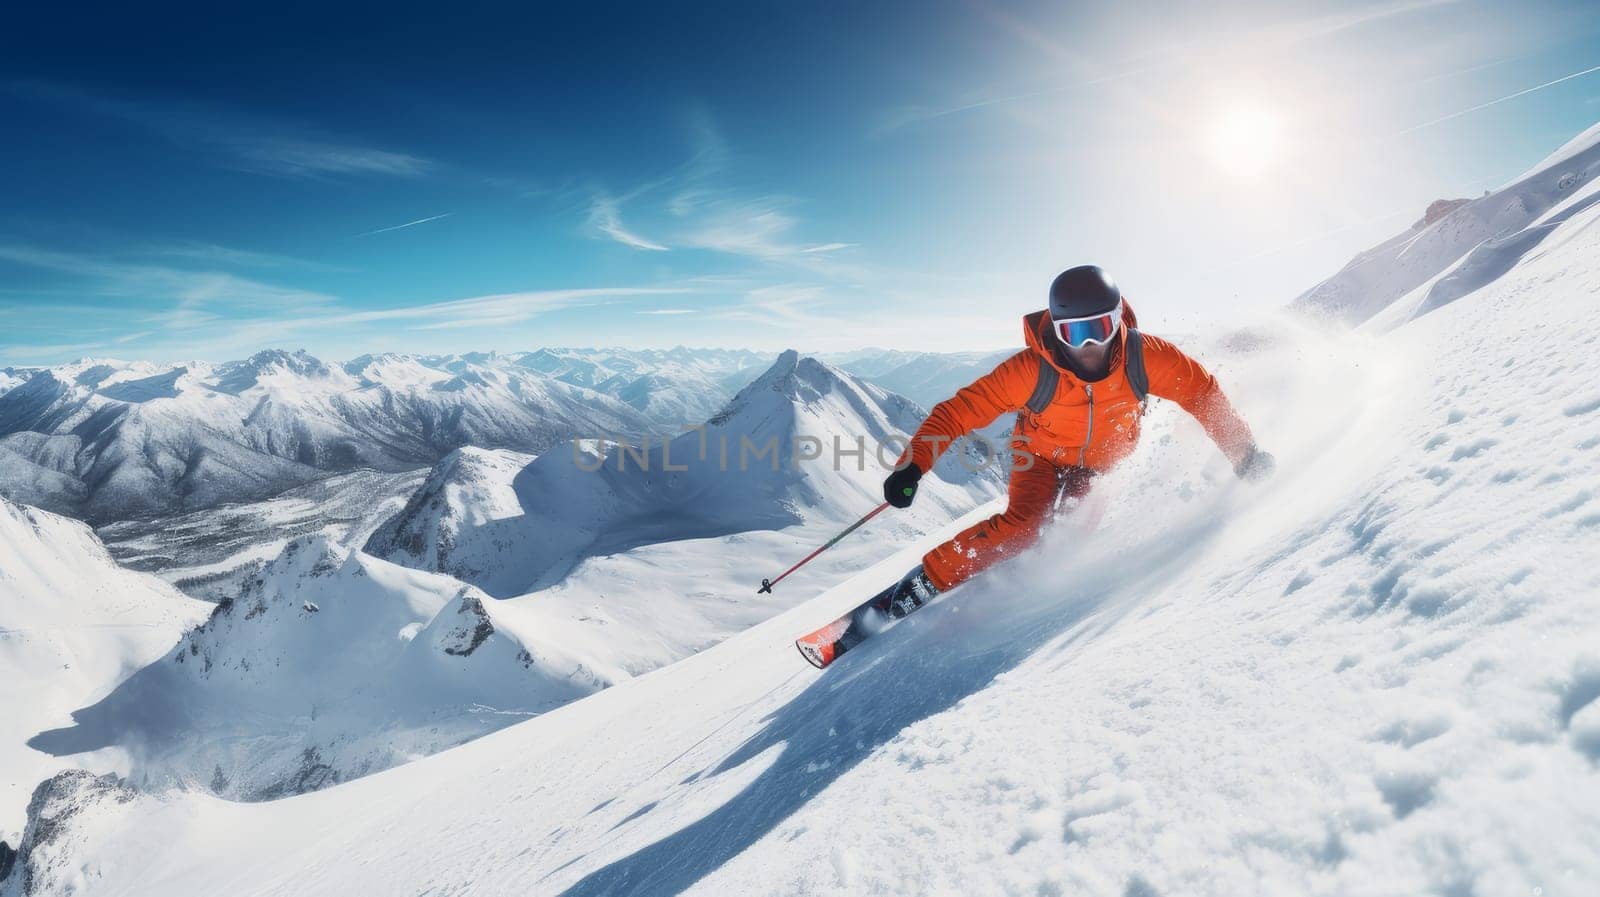 A skier descends at high speed on a snow-covered ski slope at a resort in an orange suit. by Alla_Yurtayeva